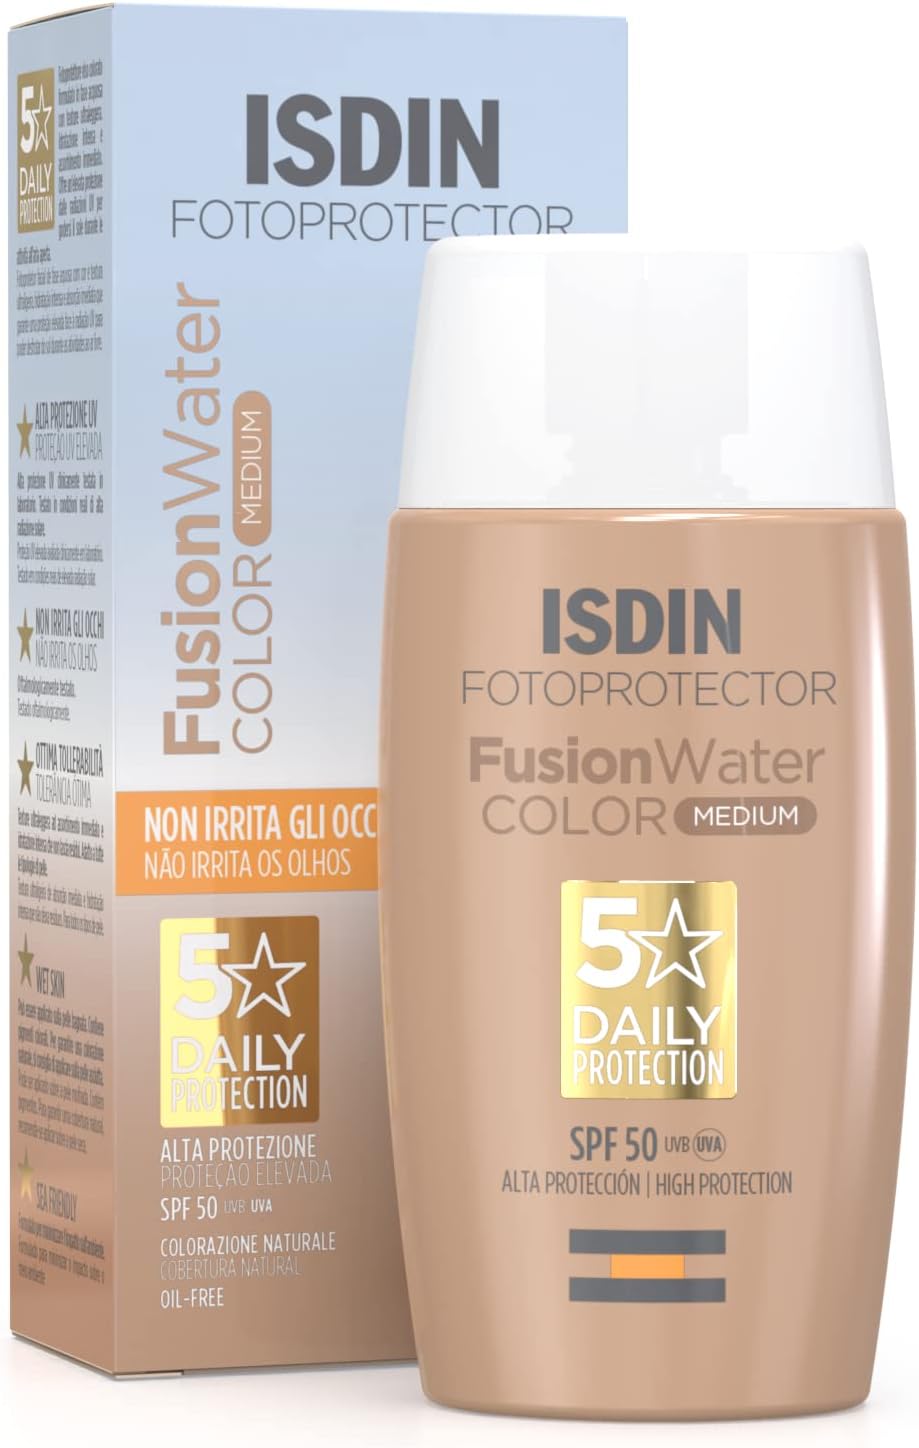 ISDIN Fusion Water Fotoprotector Color Spf50+ 50 Ml